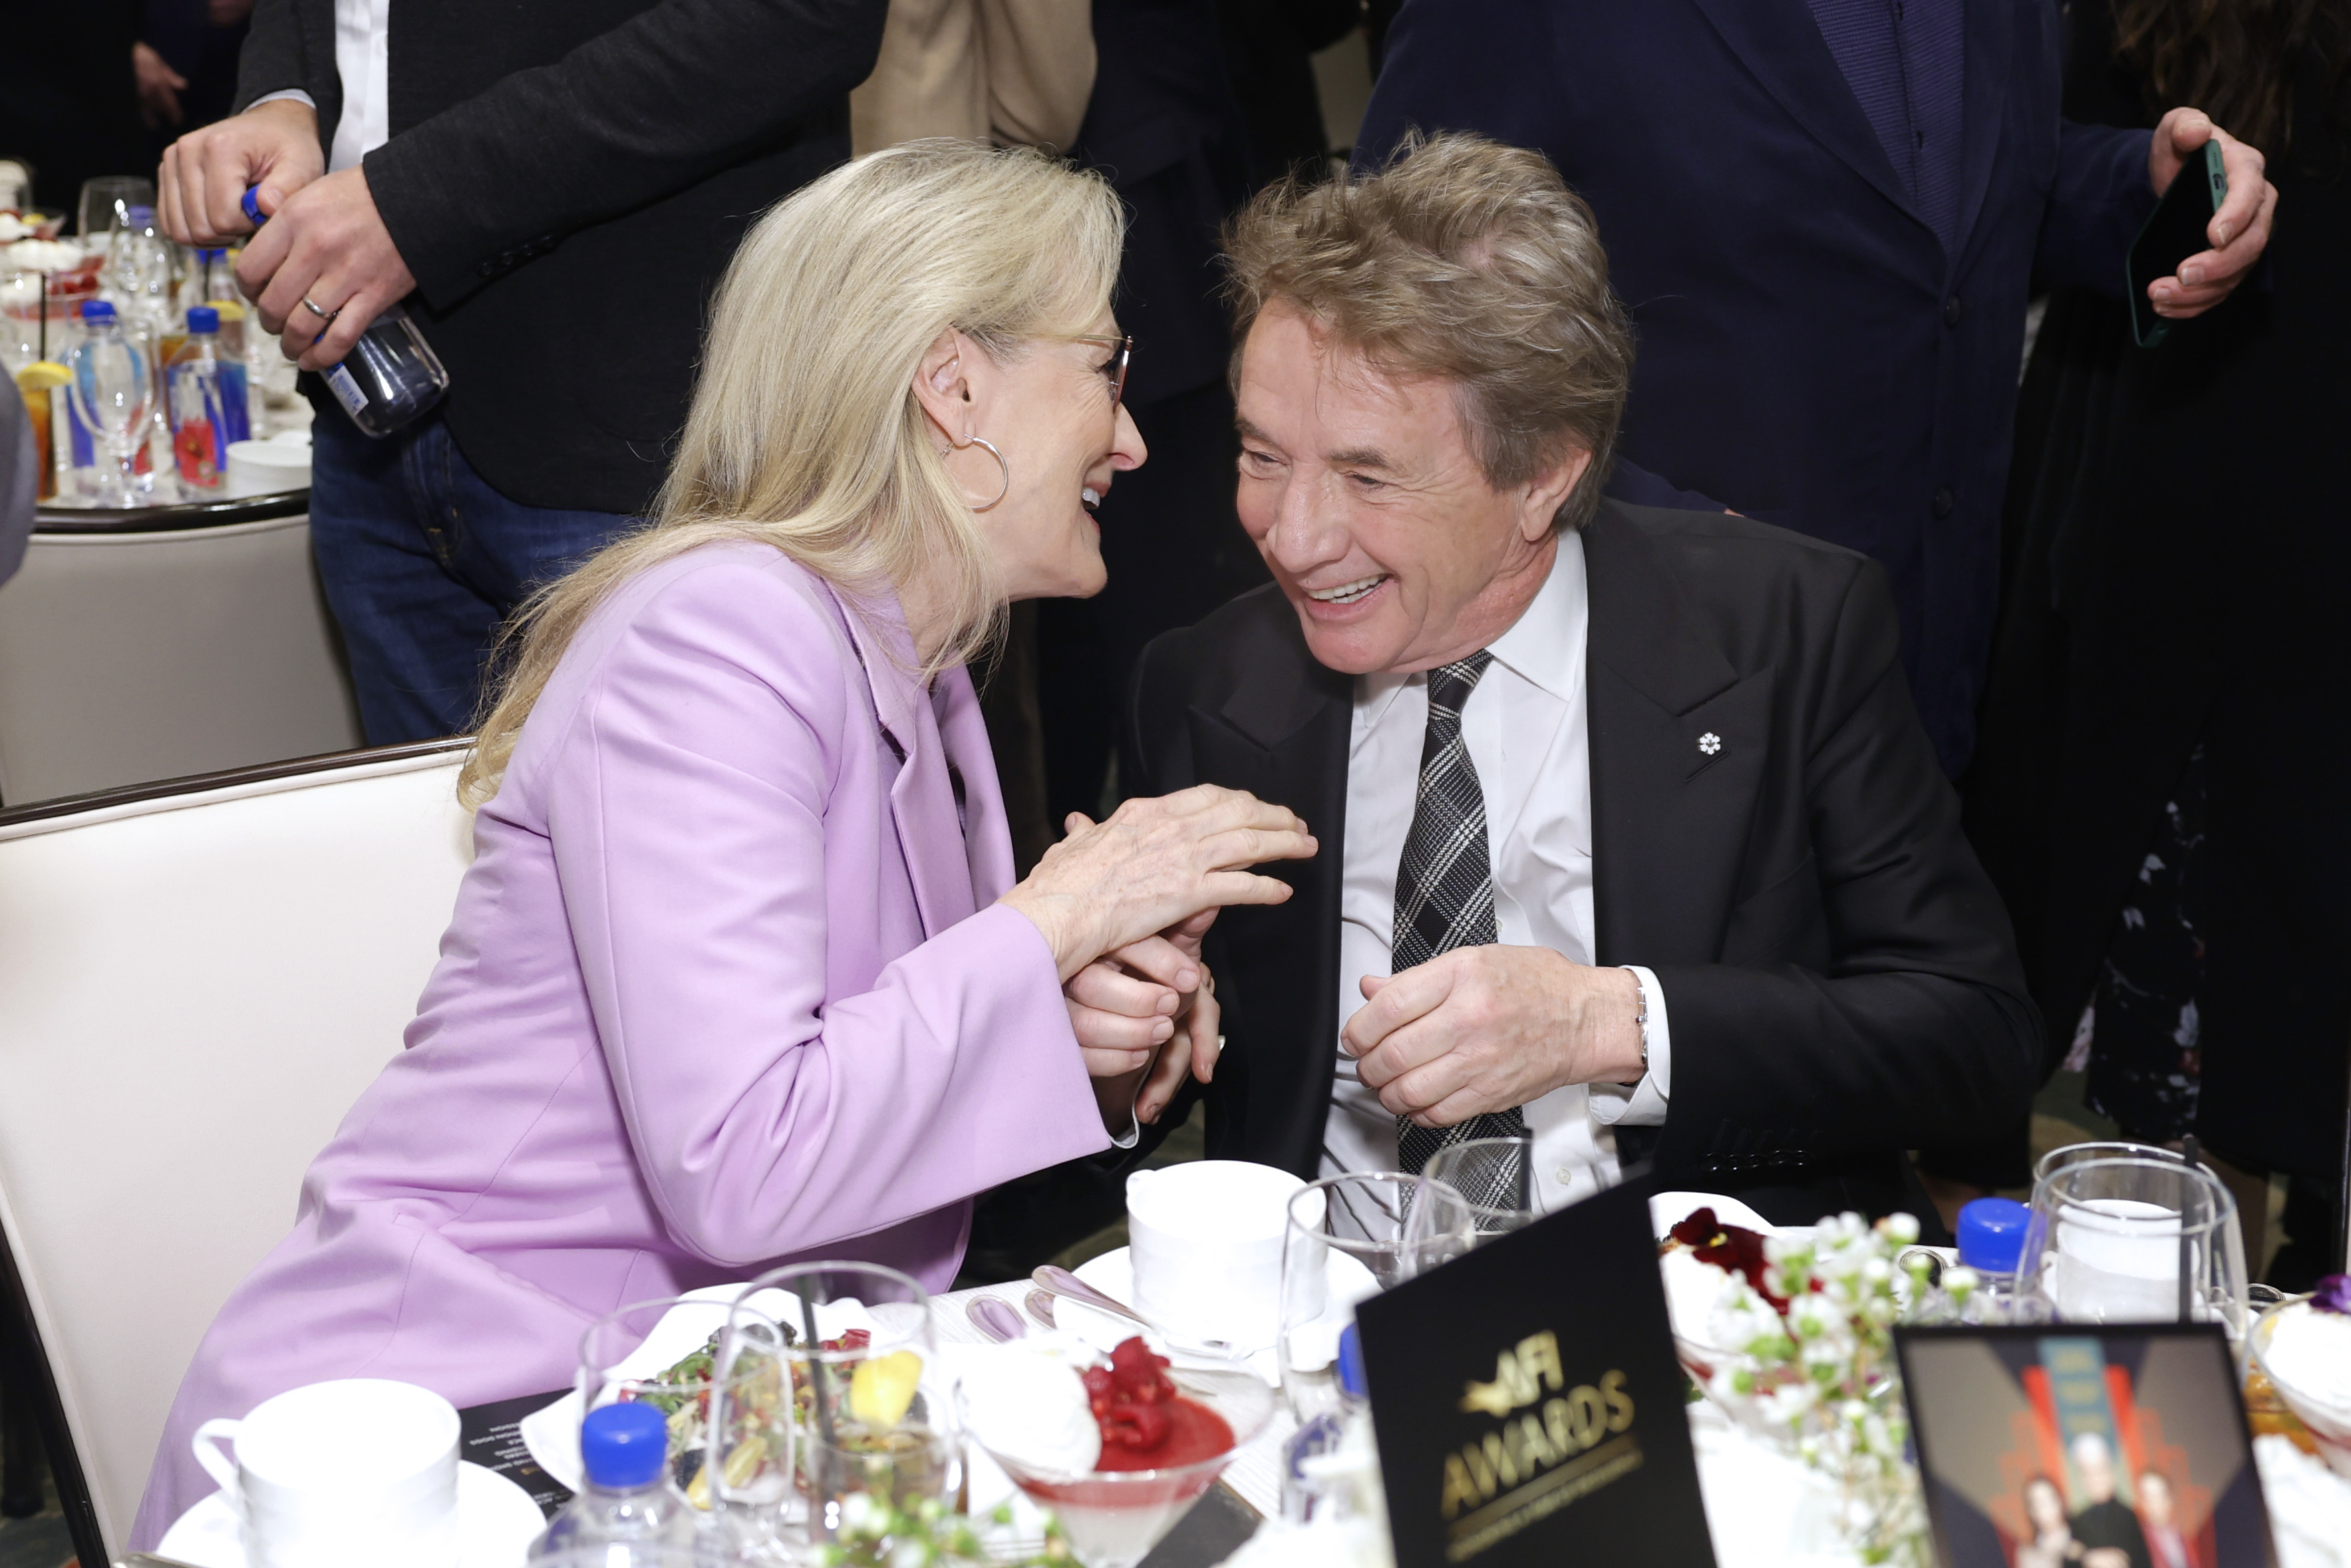 Two celebrities laughing together at a table during an event. Woman in a pink blazer, man in a suit with a striped tie